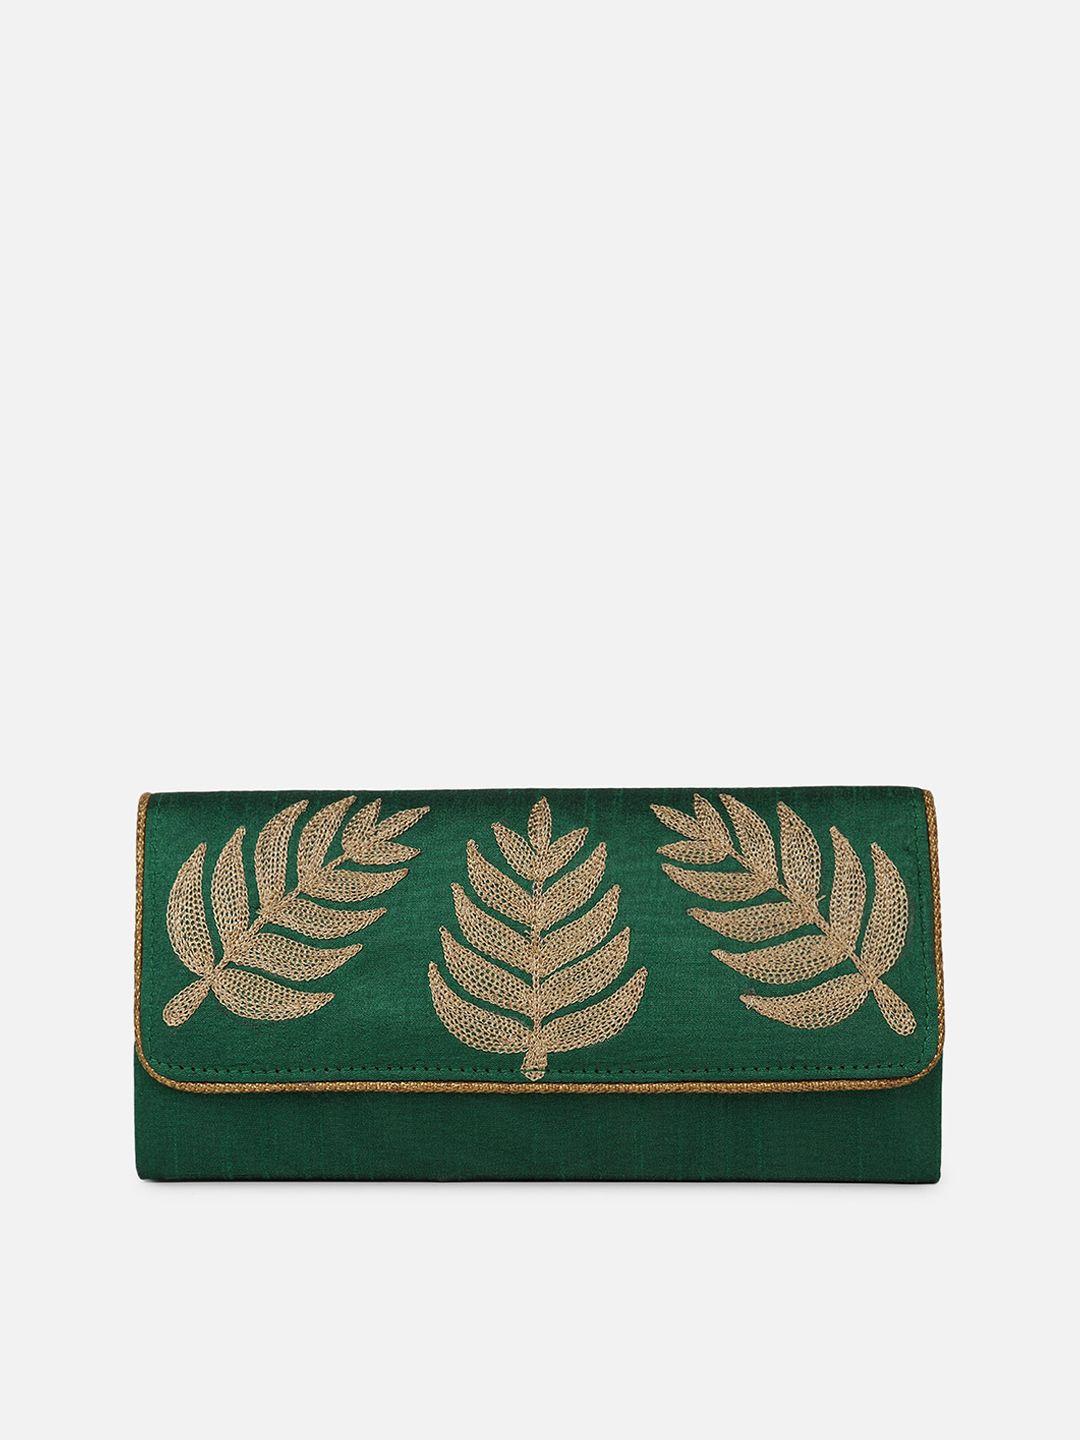 aditi-wasan-embroidered-envelope-clutch